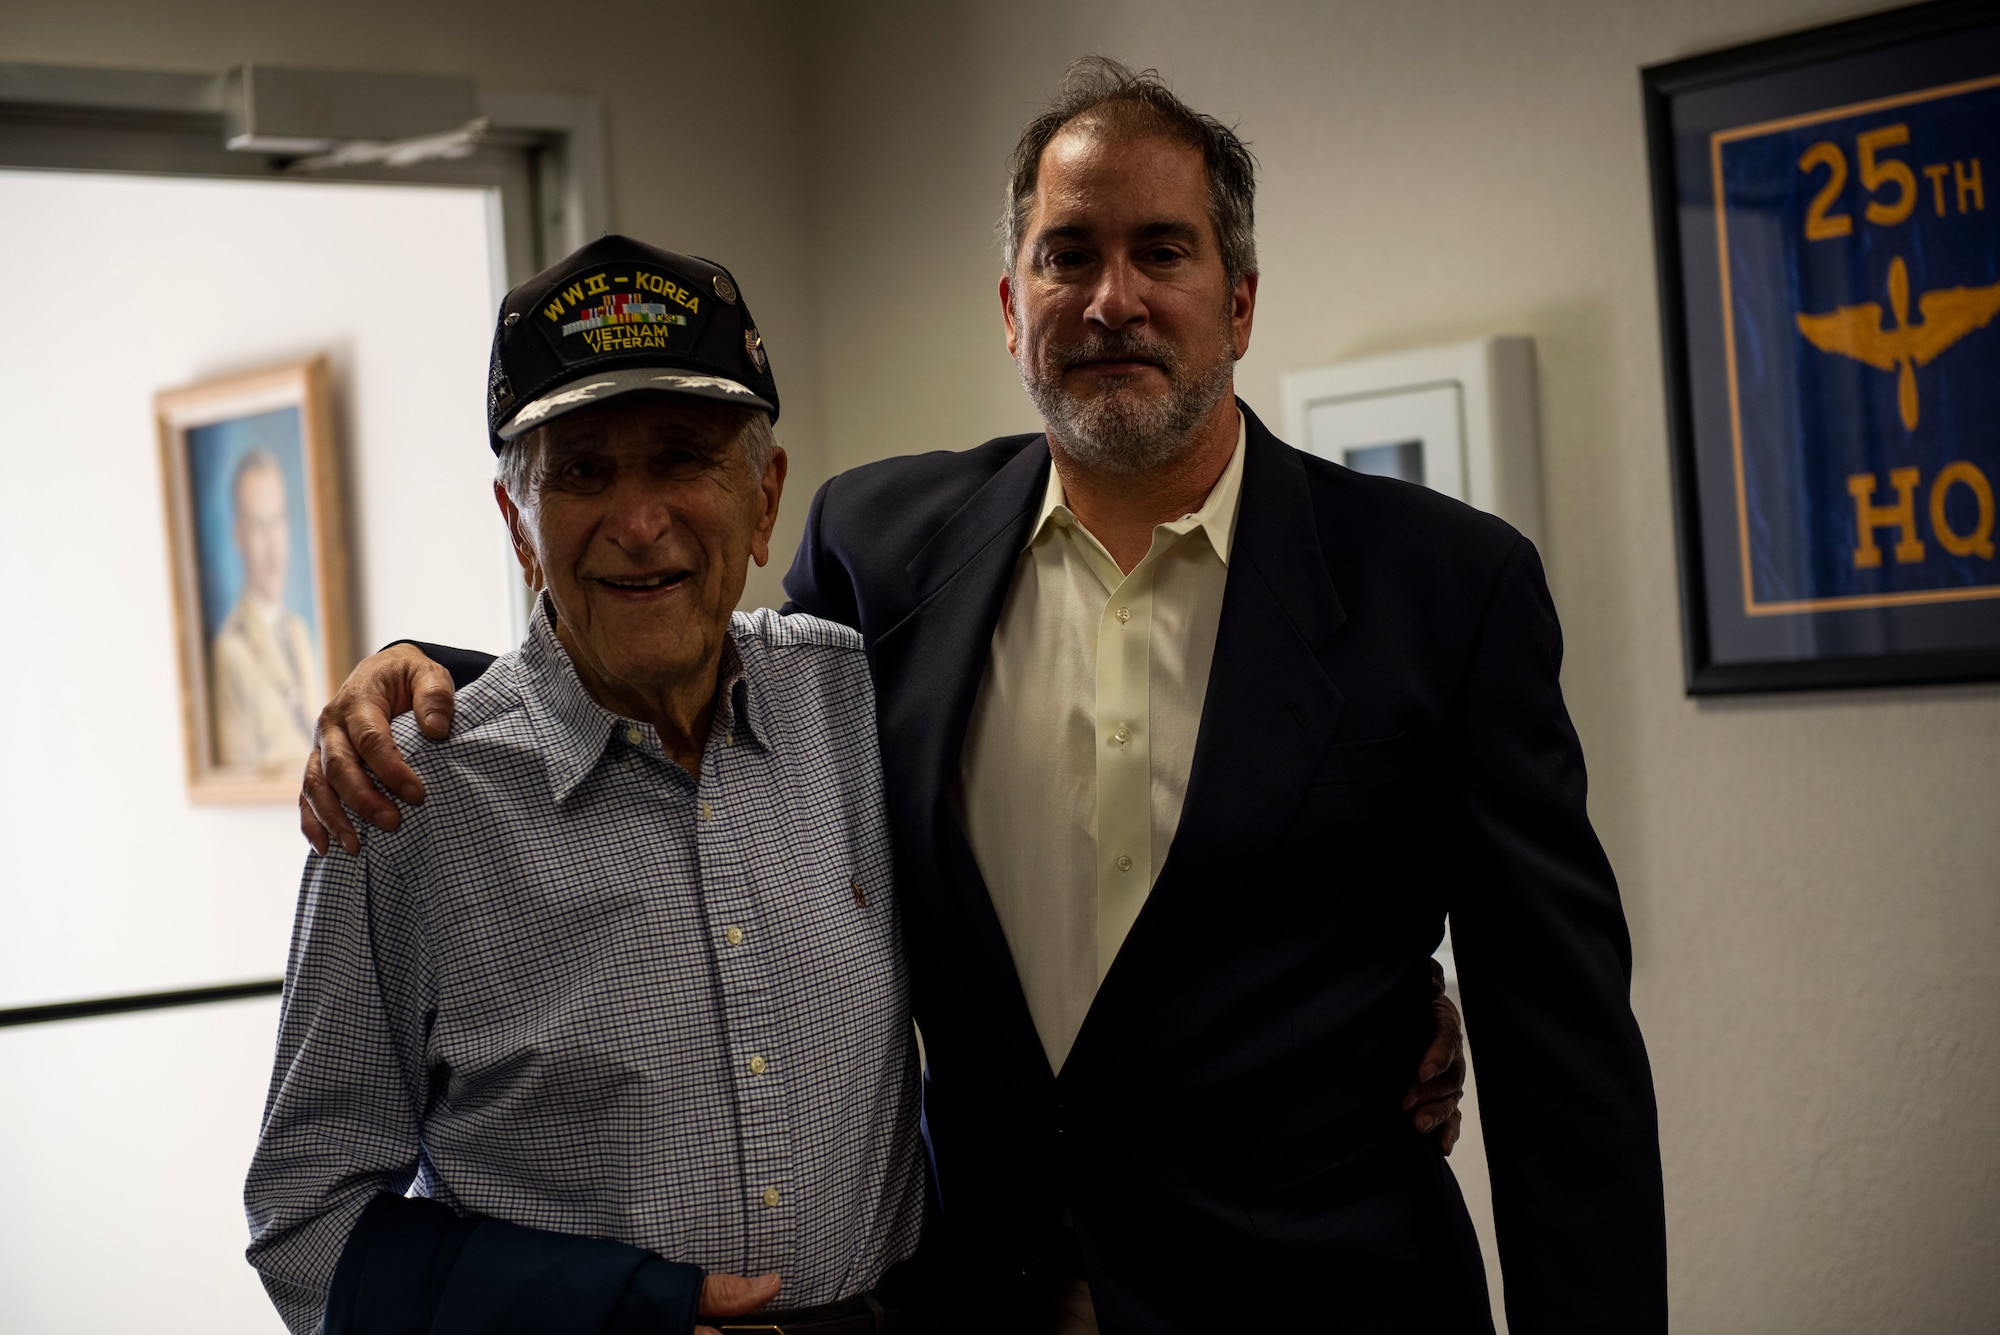 Retired U.S. Air Force Lt. Col. Daniel Daube, left, and his son Dr. Daniel Daube, right, visited Tyndall Air Force Base, Florida, Nov. 27, 2019. Daube, a veteran of World War II, Korean, and Vietnam war, visited Tyndall Air Force Base and toured multiple facilities with his son. (U.S. Air Force photo by Staff Sgt. Magen M. Reeves)